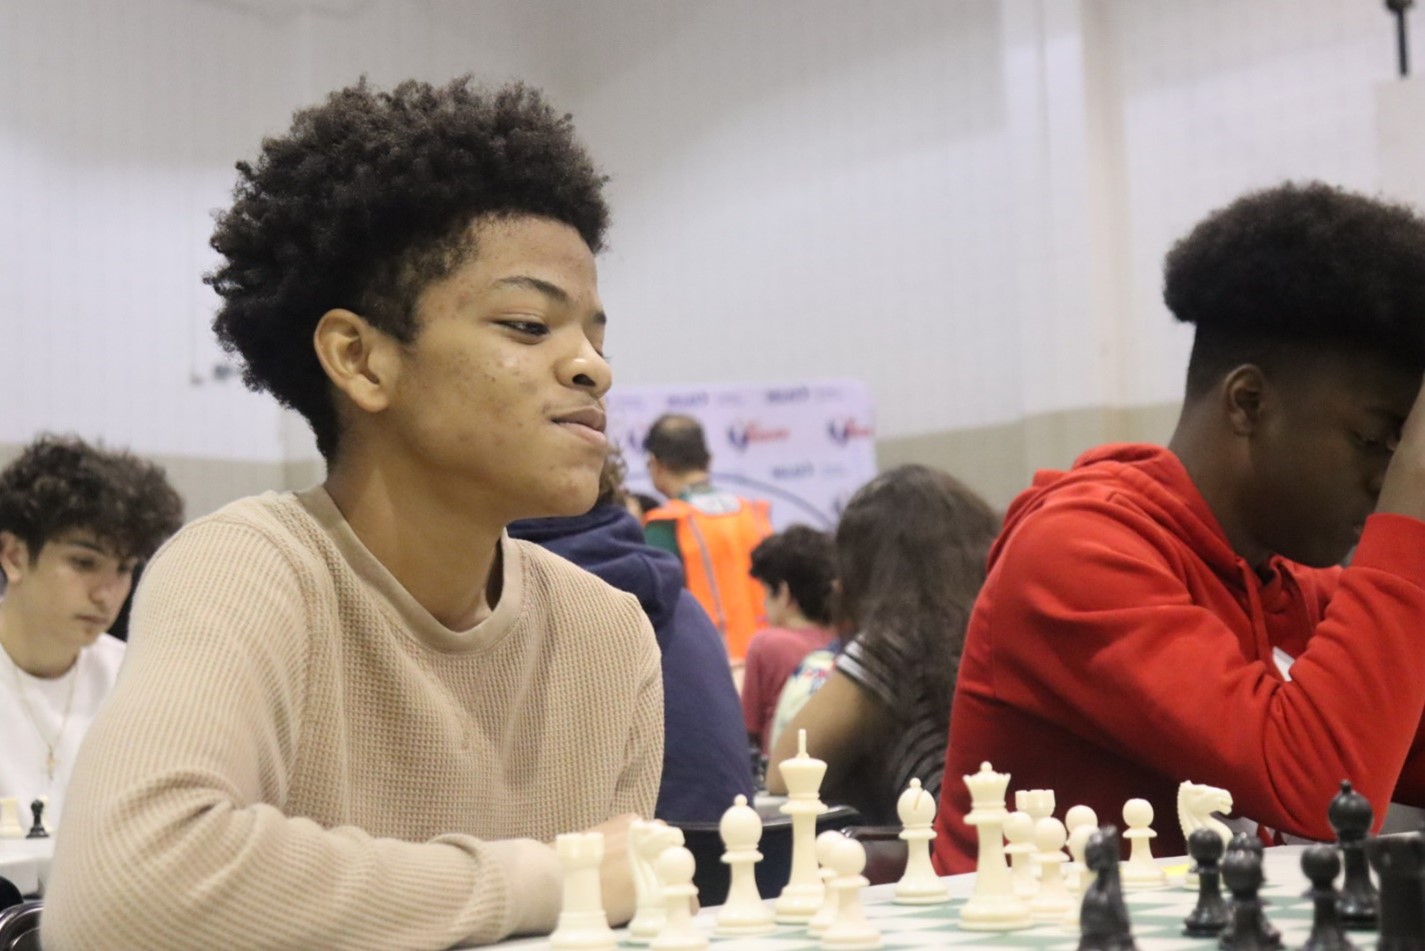 Dallas ISD chess tournaments hit record-breaking participation numbers